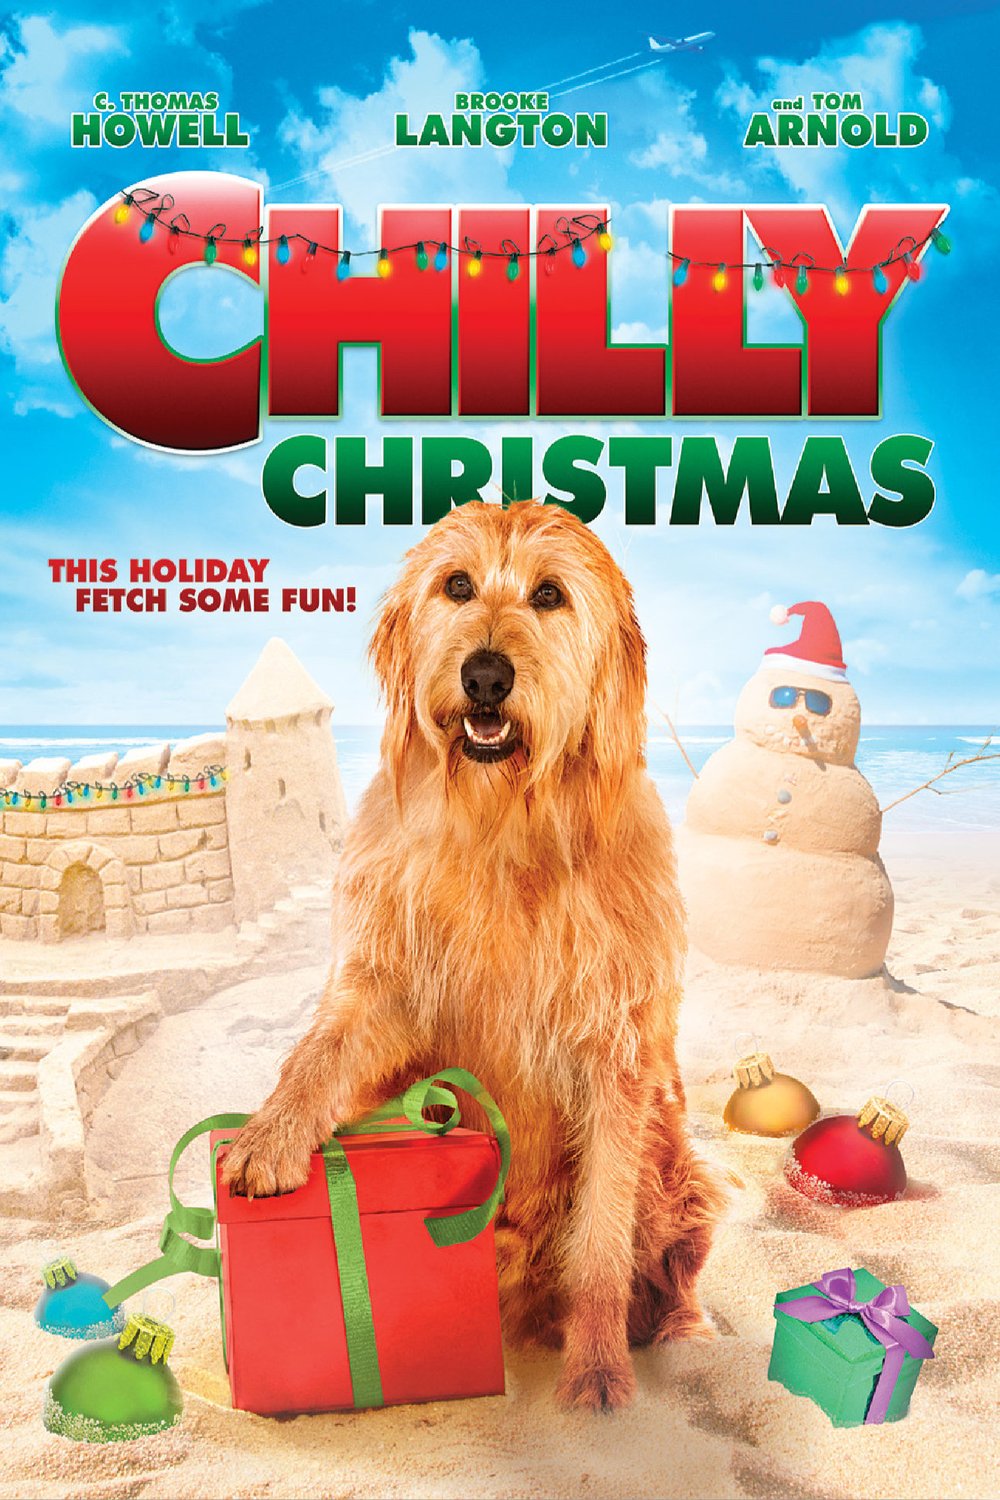 Poster of the movie Chilly Christmas